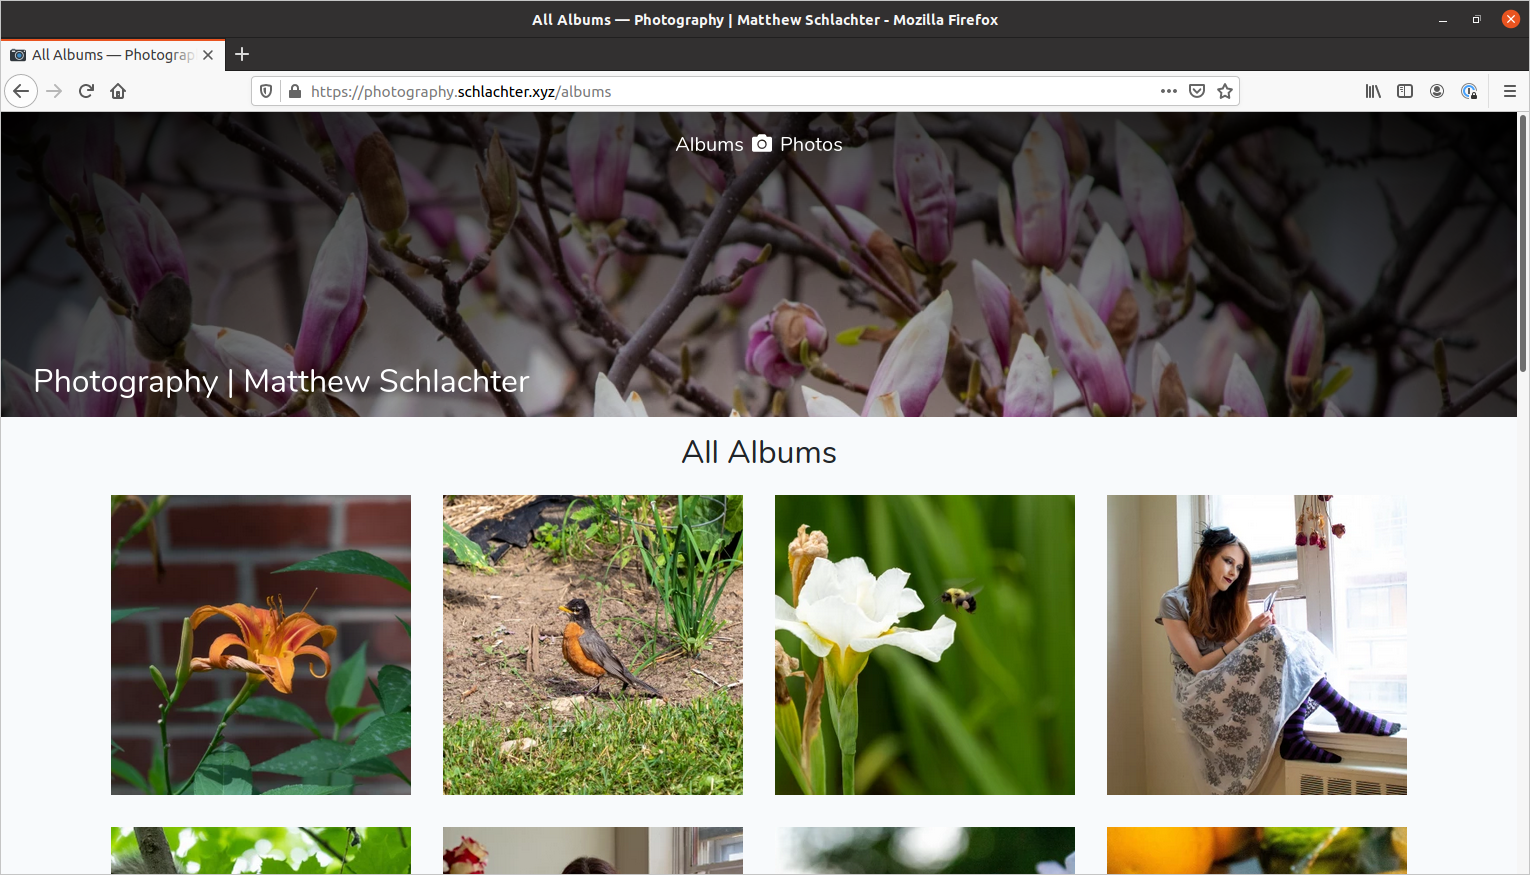 Screenshot of the 'all albums' page of a photography website